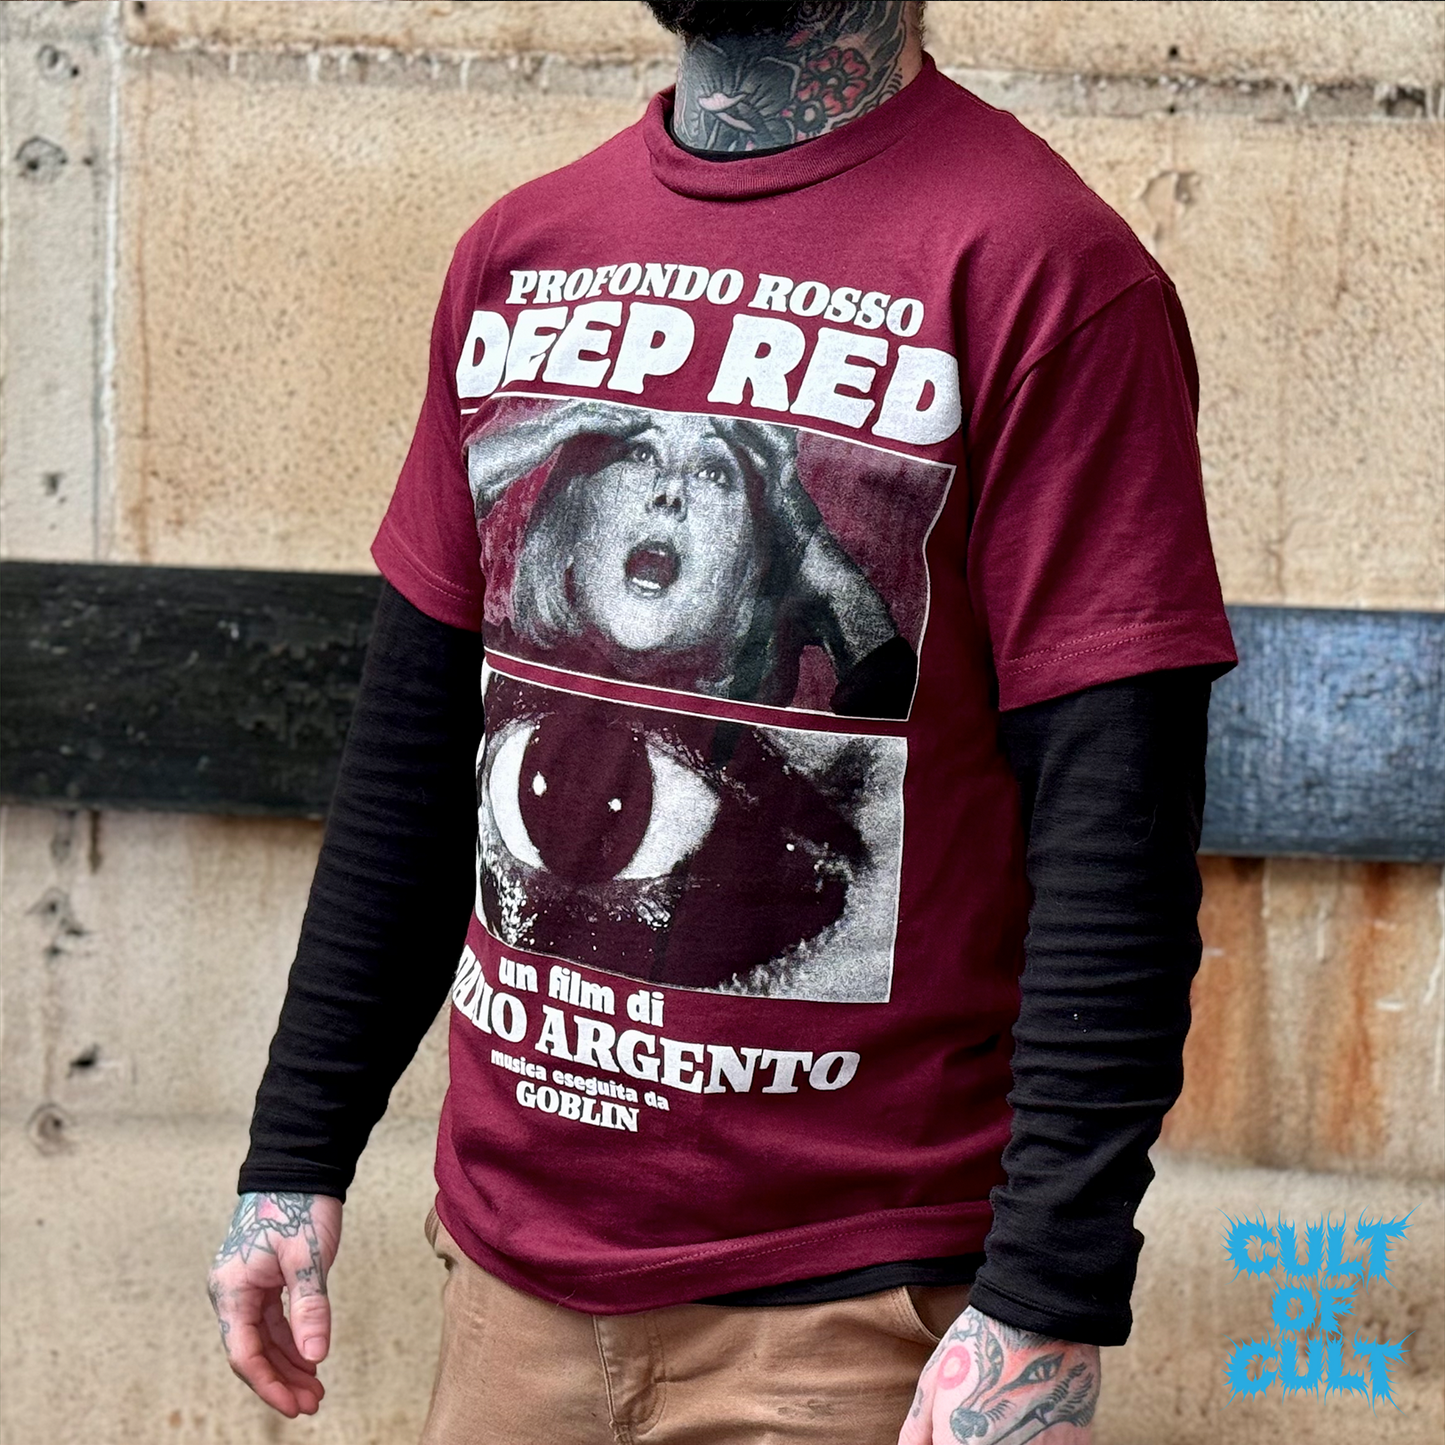 A model wearing the Deep Red Profondo Rosso 1975 shirt, pictured from the front.